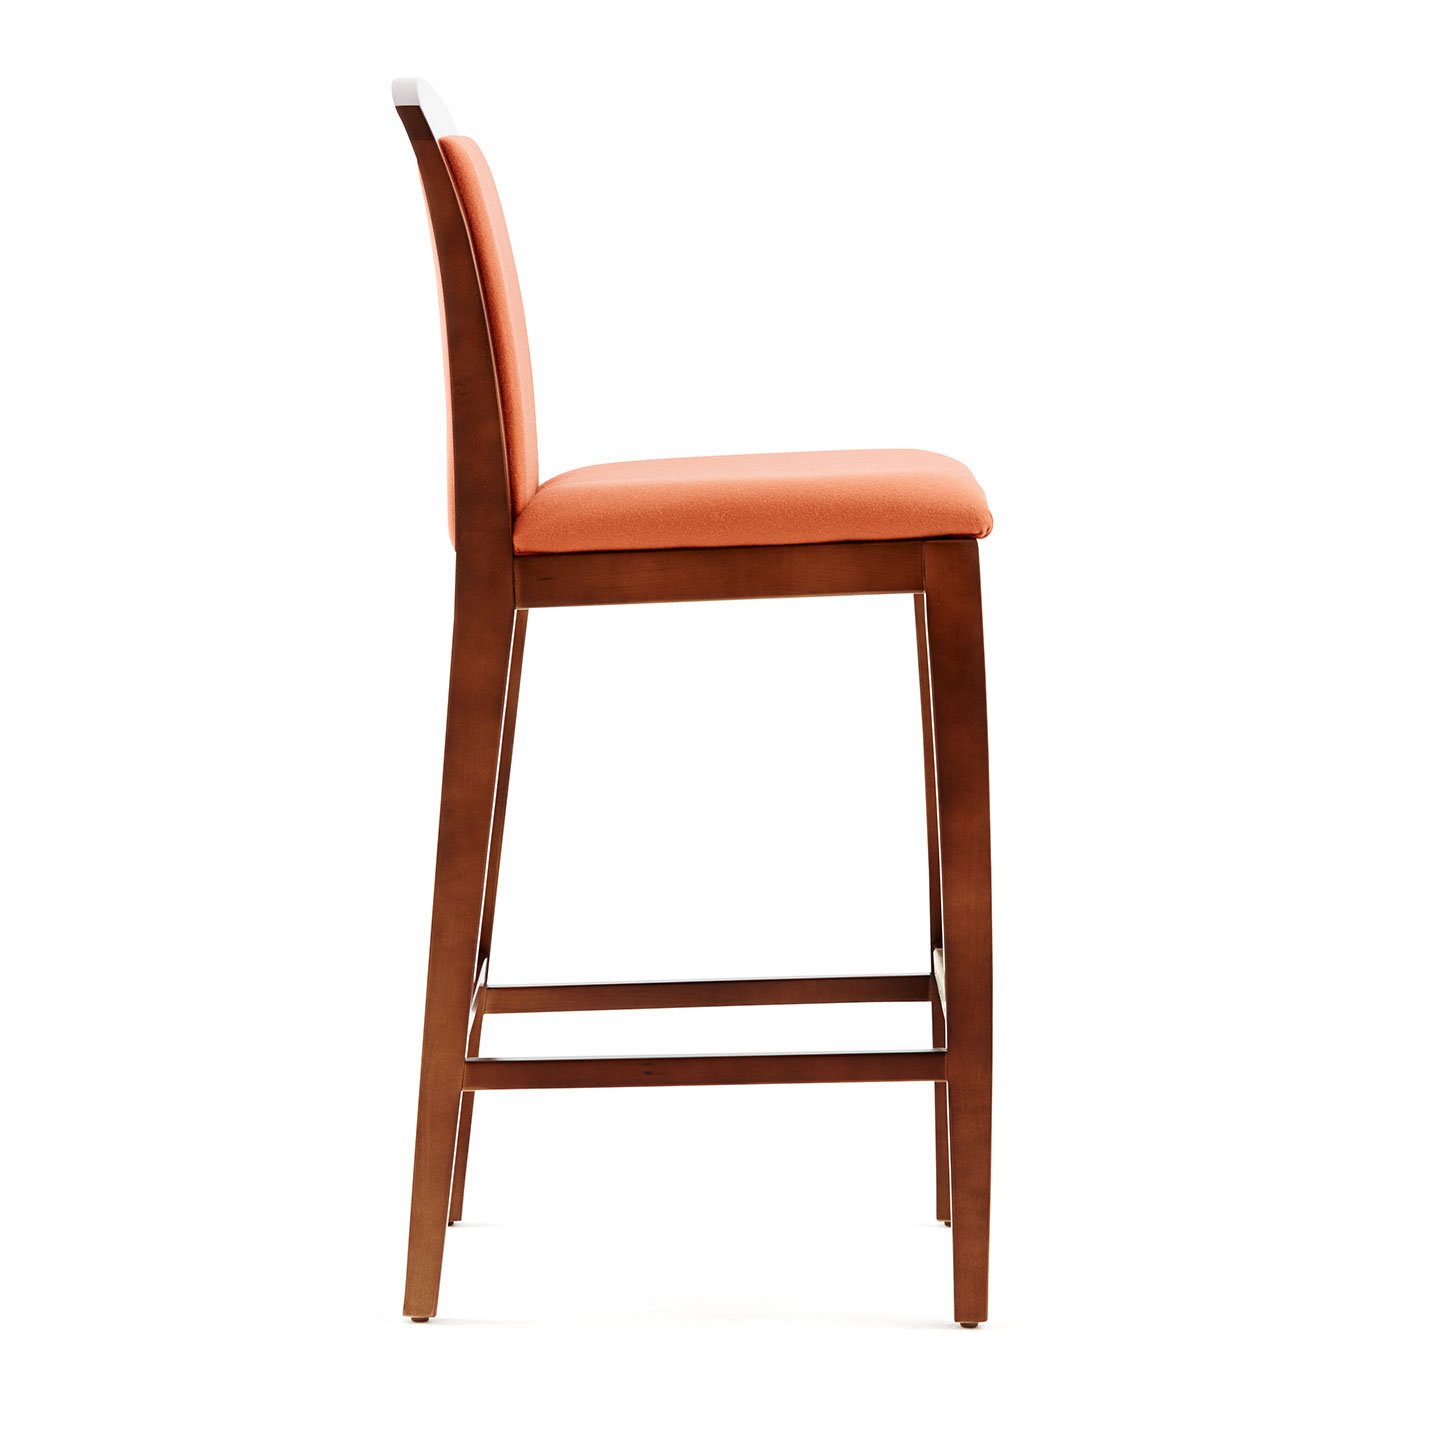 Haworth Composites stool in orange fabric, dark wood body and legs seen from the side angle